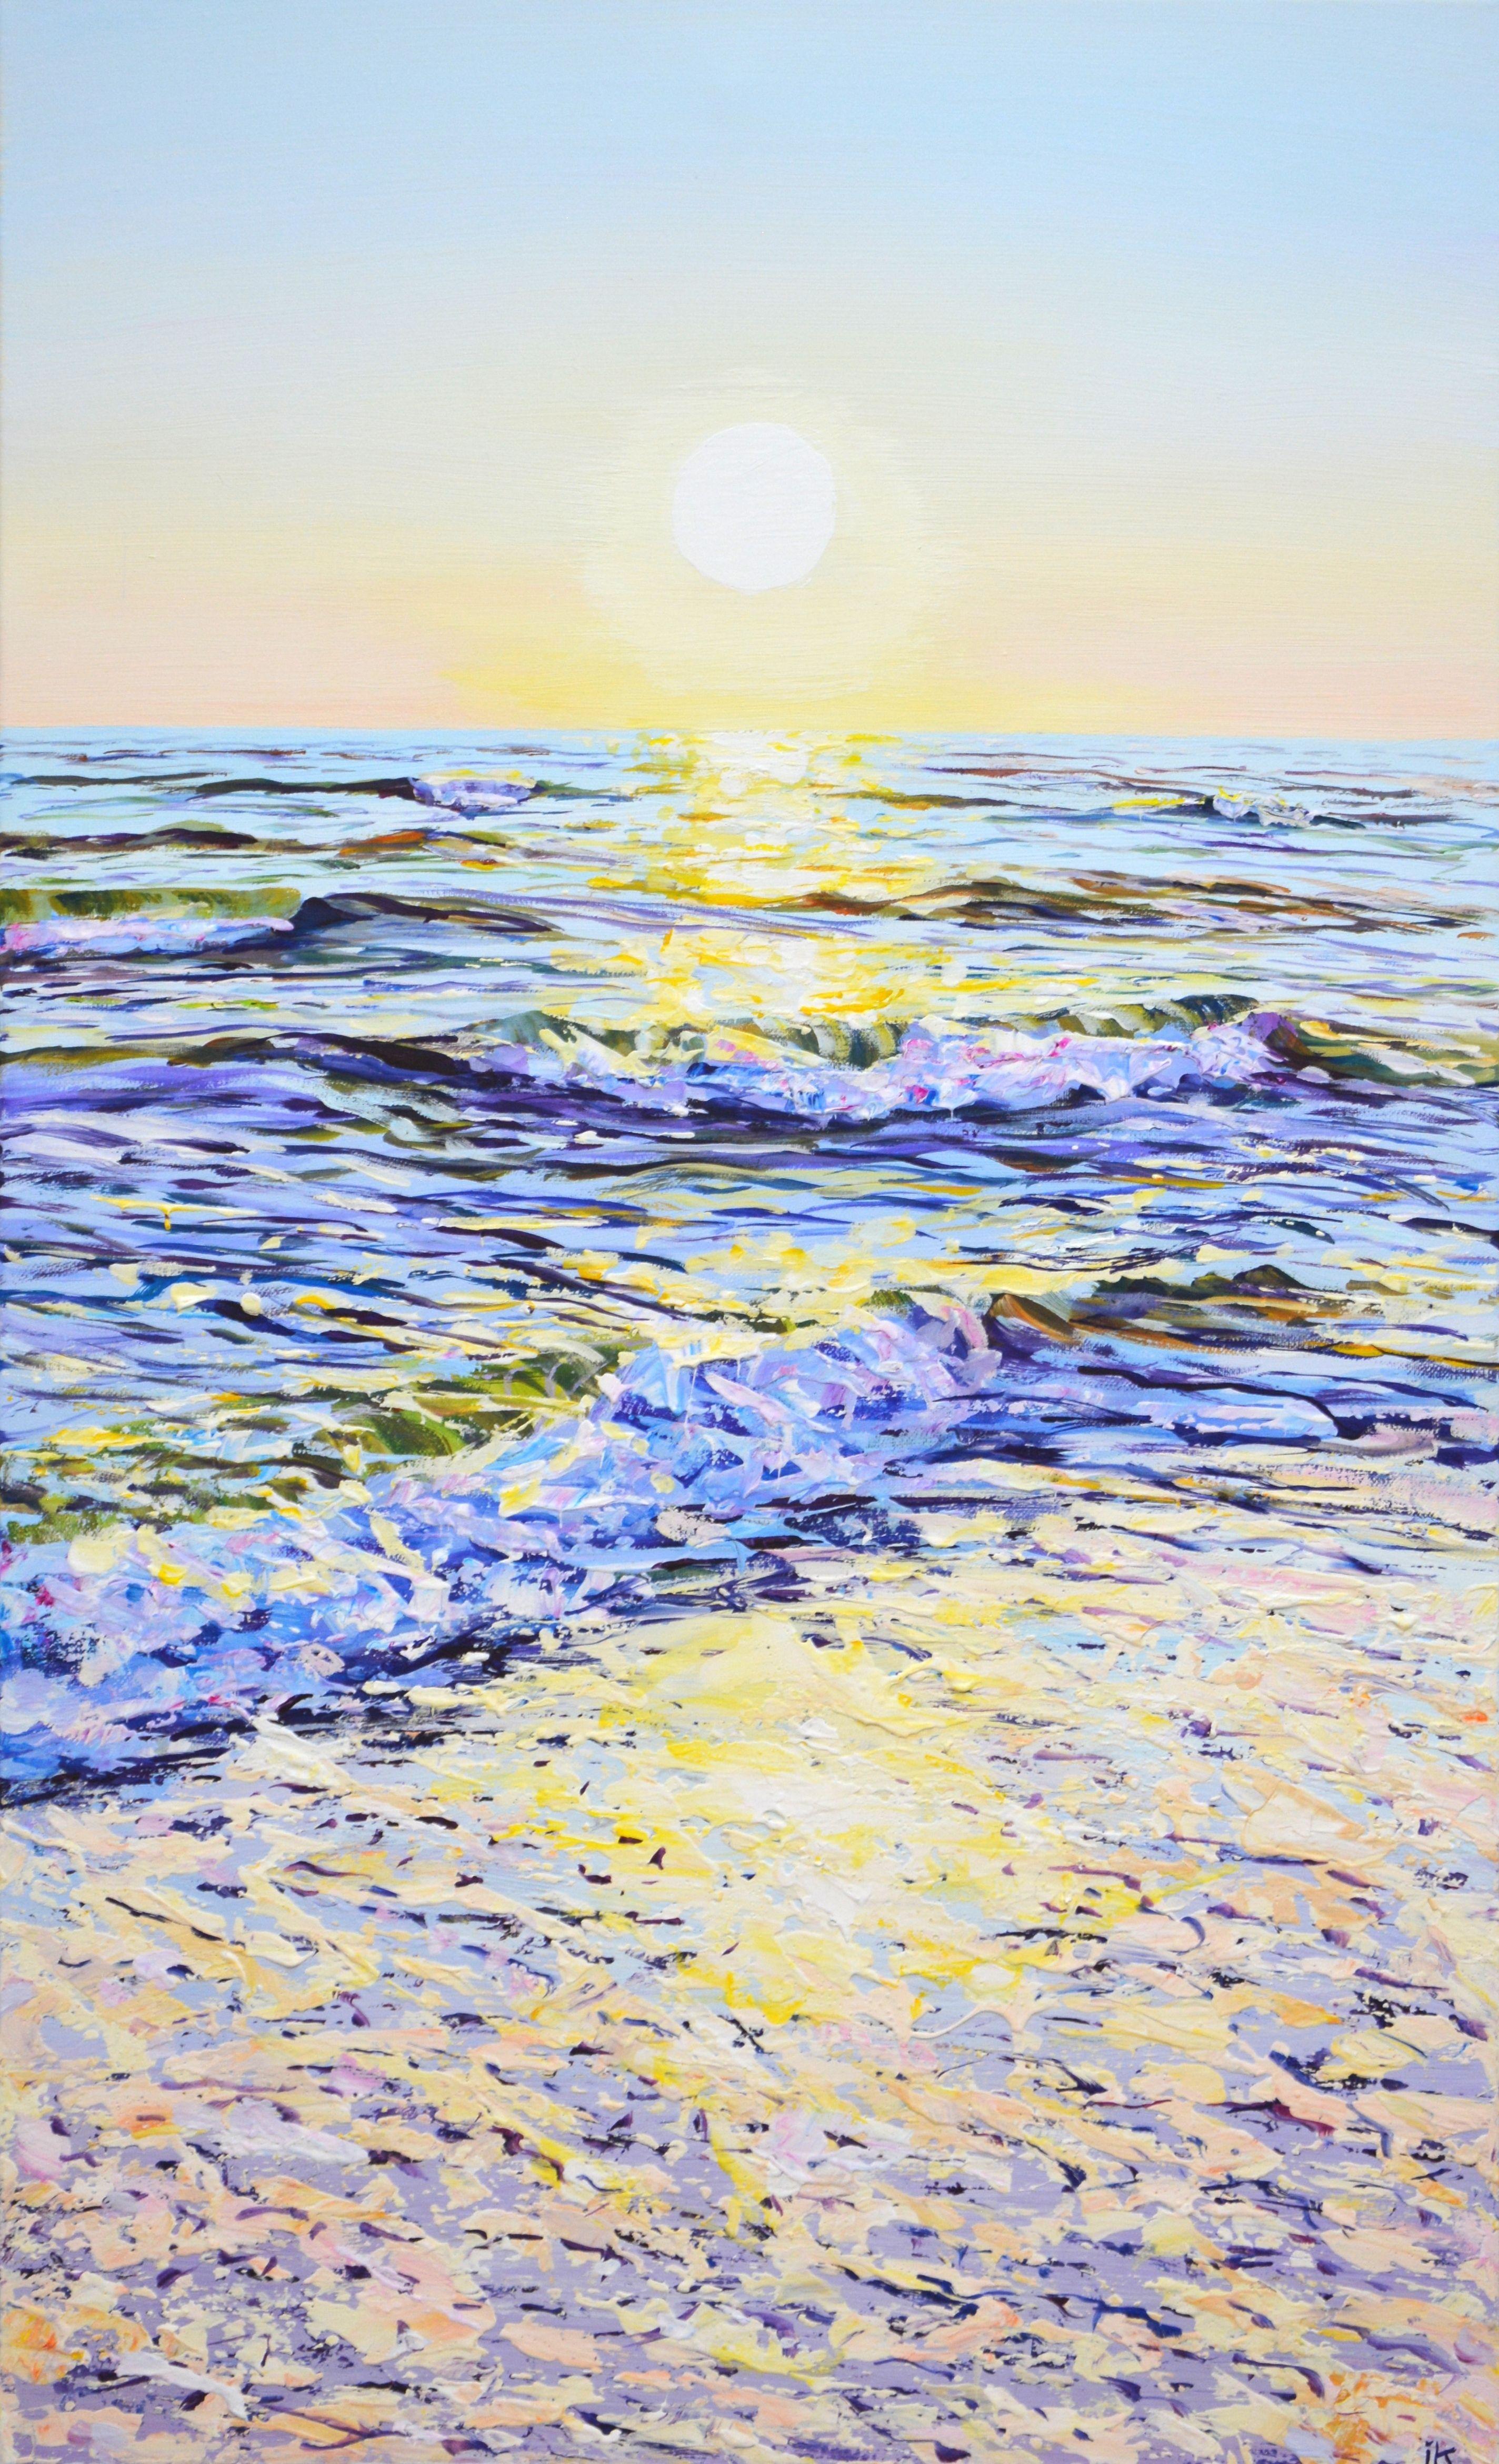 Ocean. The sun. Warm water, sea, ocean, waves, sea foam, sun glare on the water, clear sky, sun create an atmosphere of relaxation and romance. Light flickers on the surface of the water, creating a serene look. Made in the style of realism. Part of